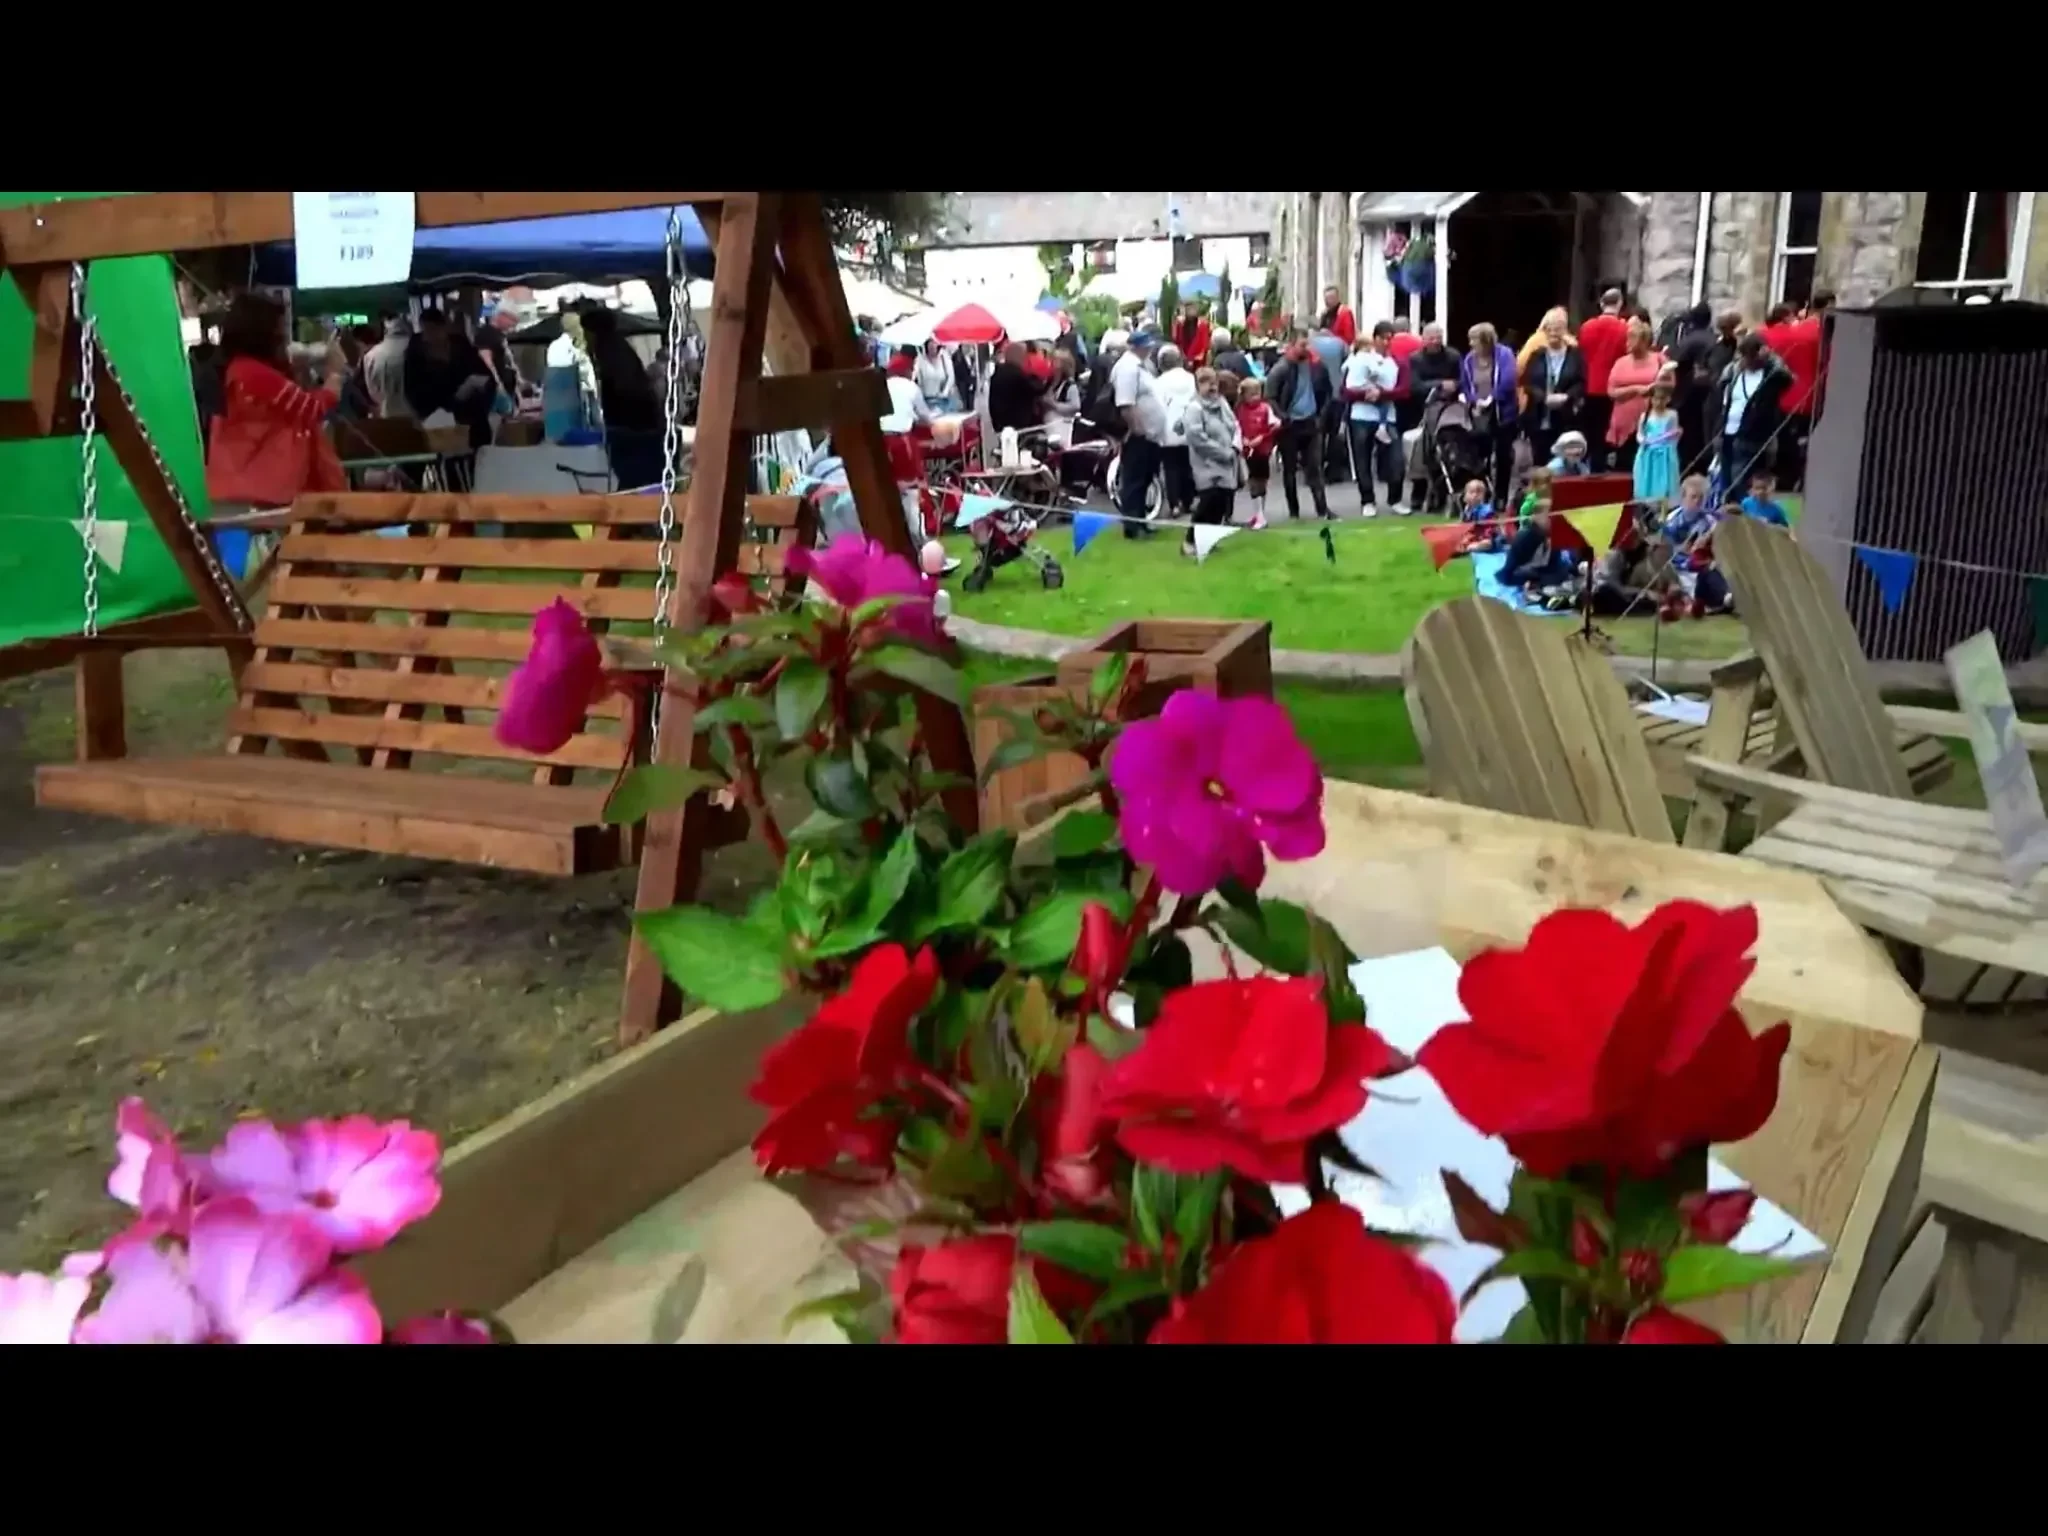 More information about "Prestatyn Flower Show (2015) by David Francis"